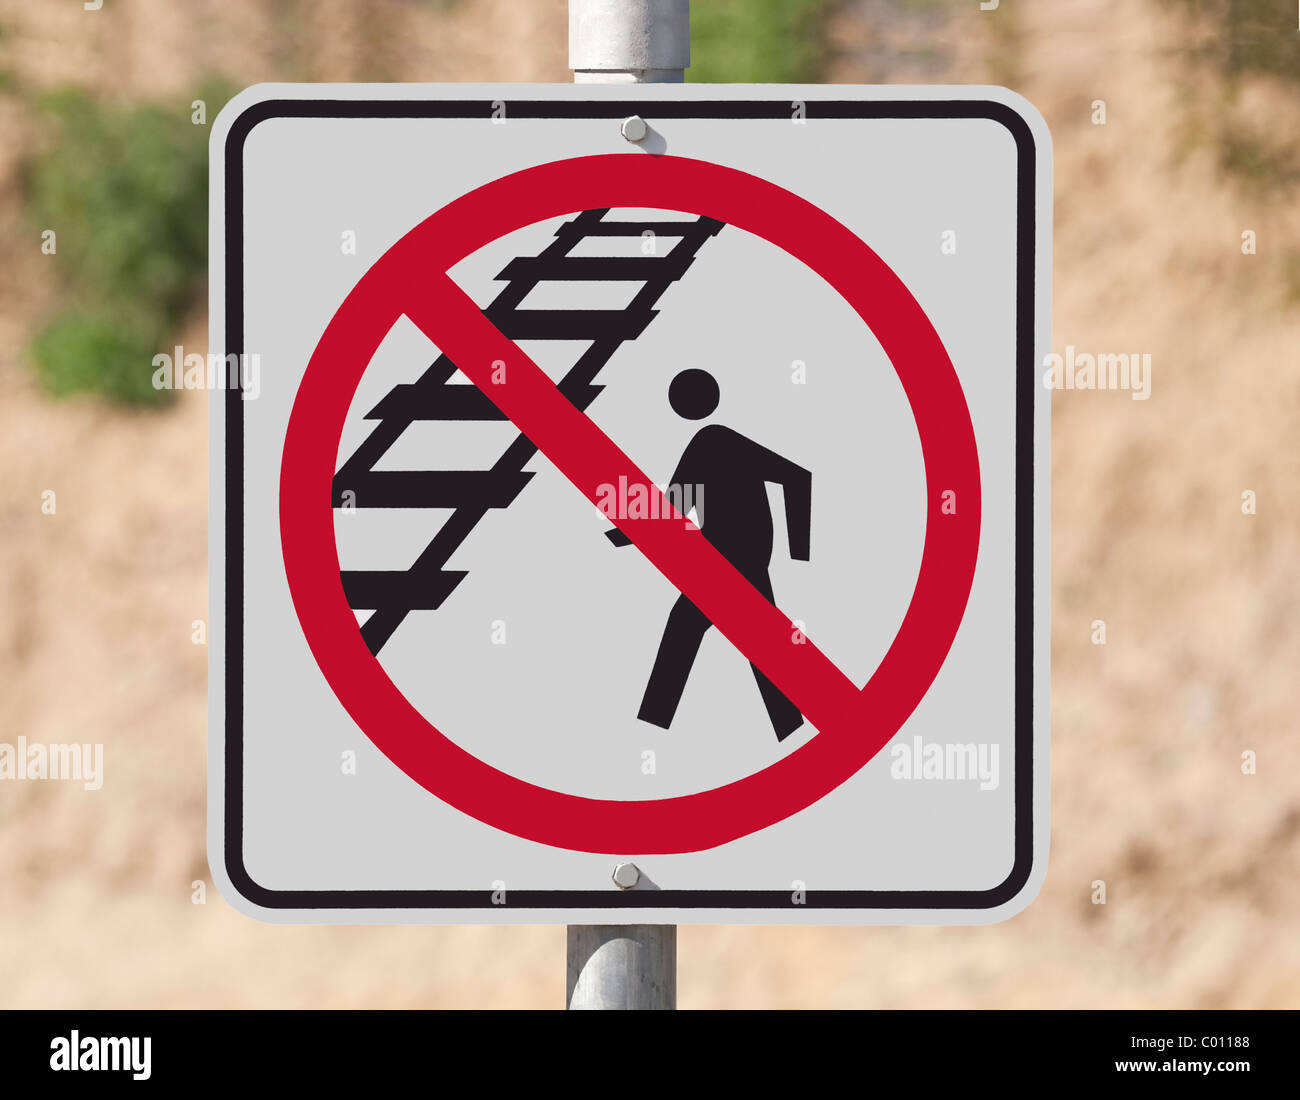 Do not cross the tracks. Railroad safety sign. Stock Photo